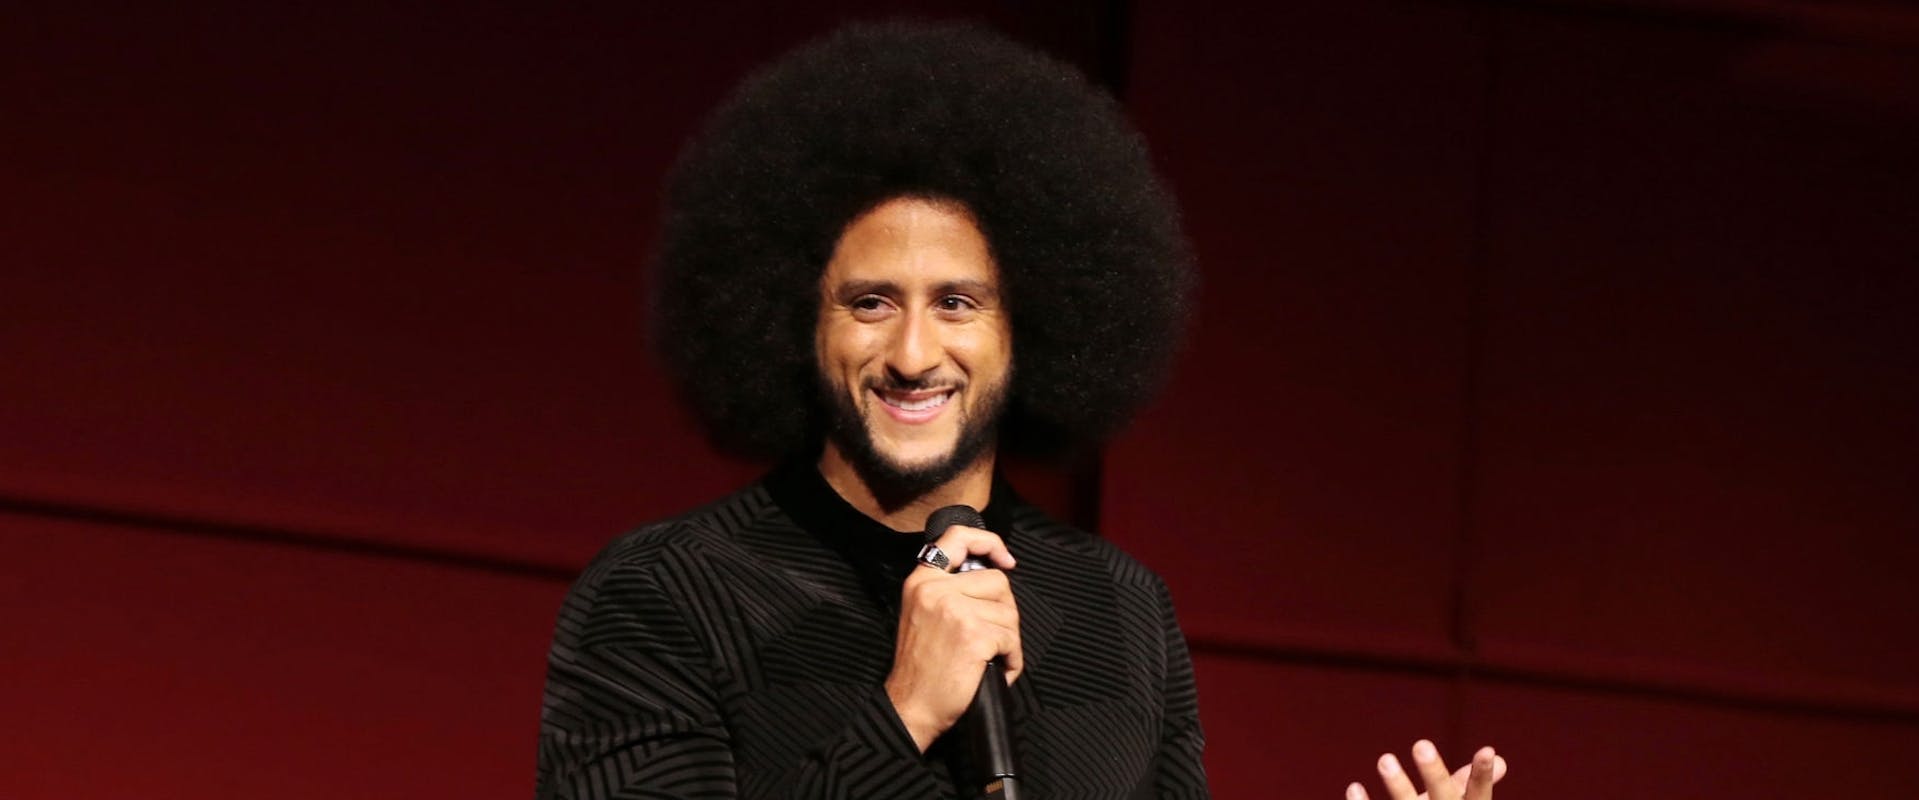 Colin Kaepernick speaks onstage during the Netflix Limited Series "Colin in Black and White" Premiere at Los Angeles County Museum of Art on October 28, 2021 in Los Angeles, California.